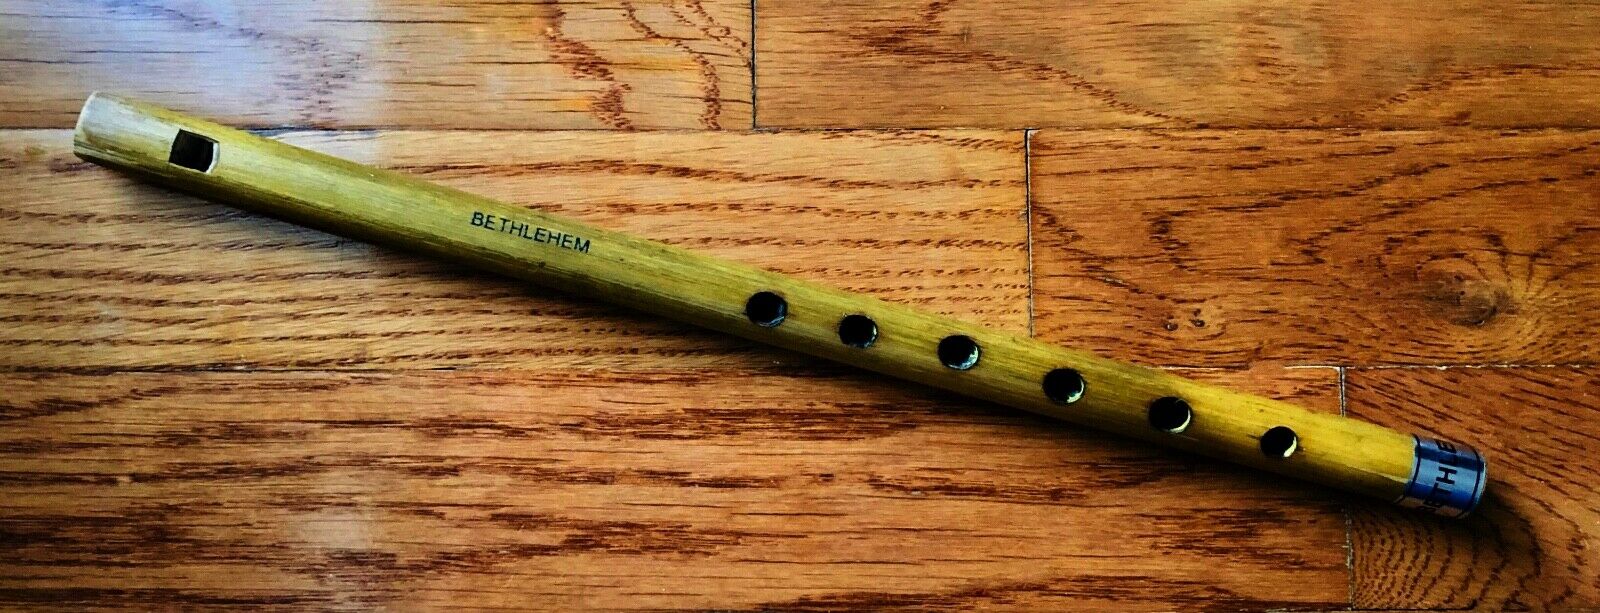 Souvenir Reed Flute ~ Wood Wind Whistle Recorder from Bethlehem Holy Land